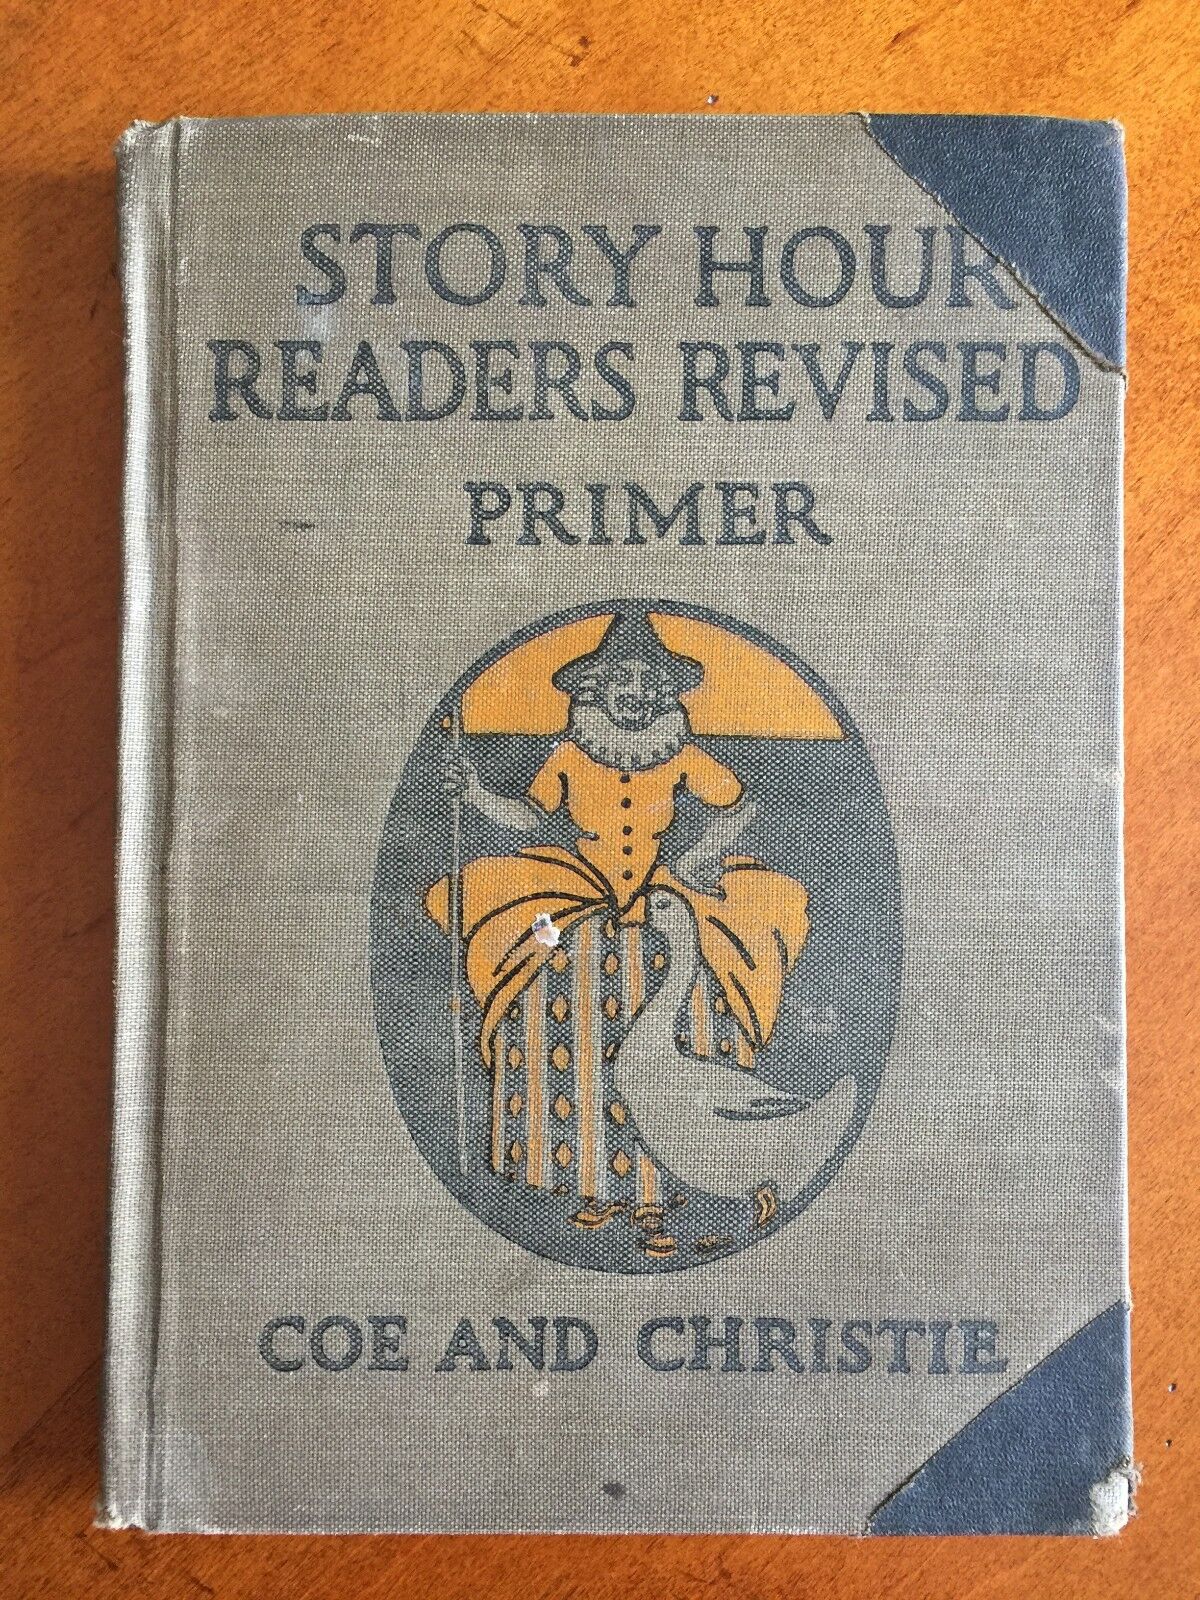 Story Hour Readers Revised Primer by Ida Coe and Alice Christie Dillon HC 1923